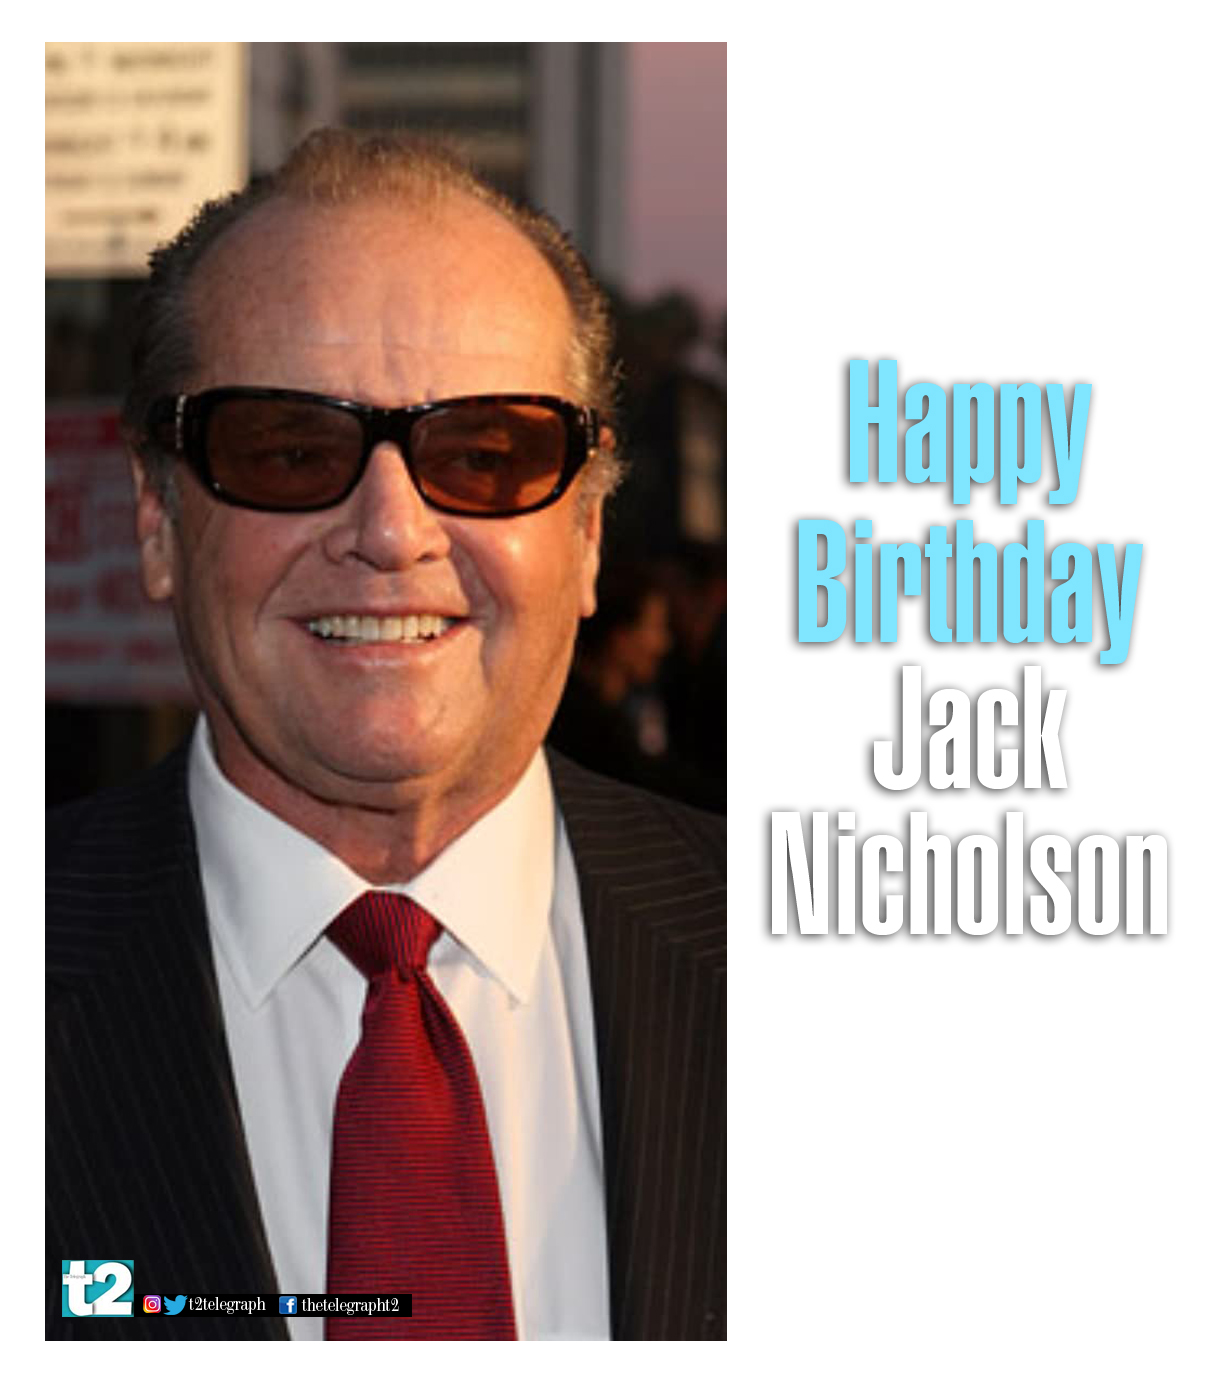 Happy birthday Jack Nicholson. You always make going to the movies a rich experience. 